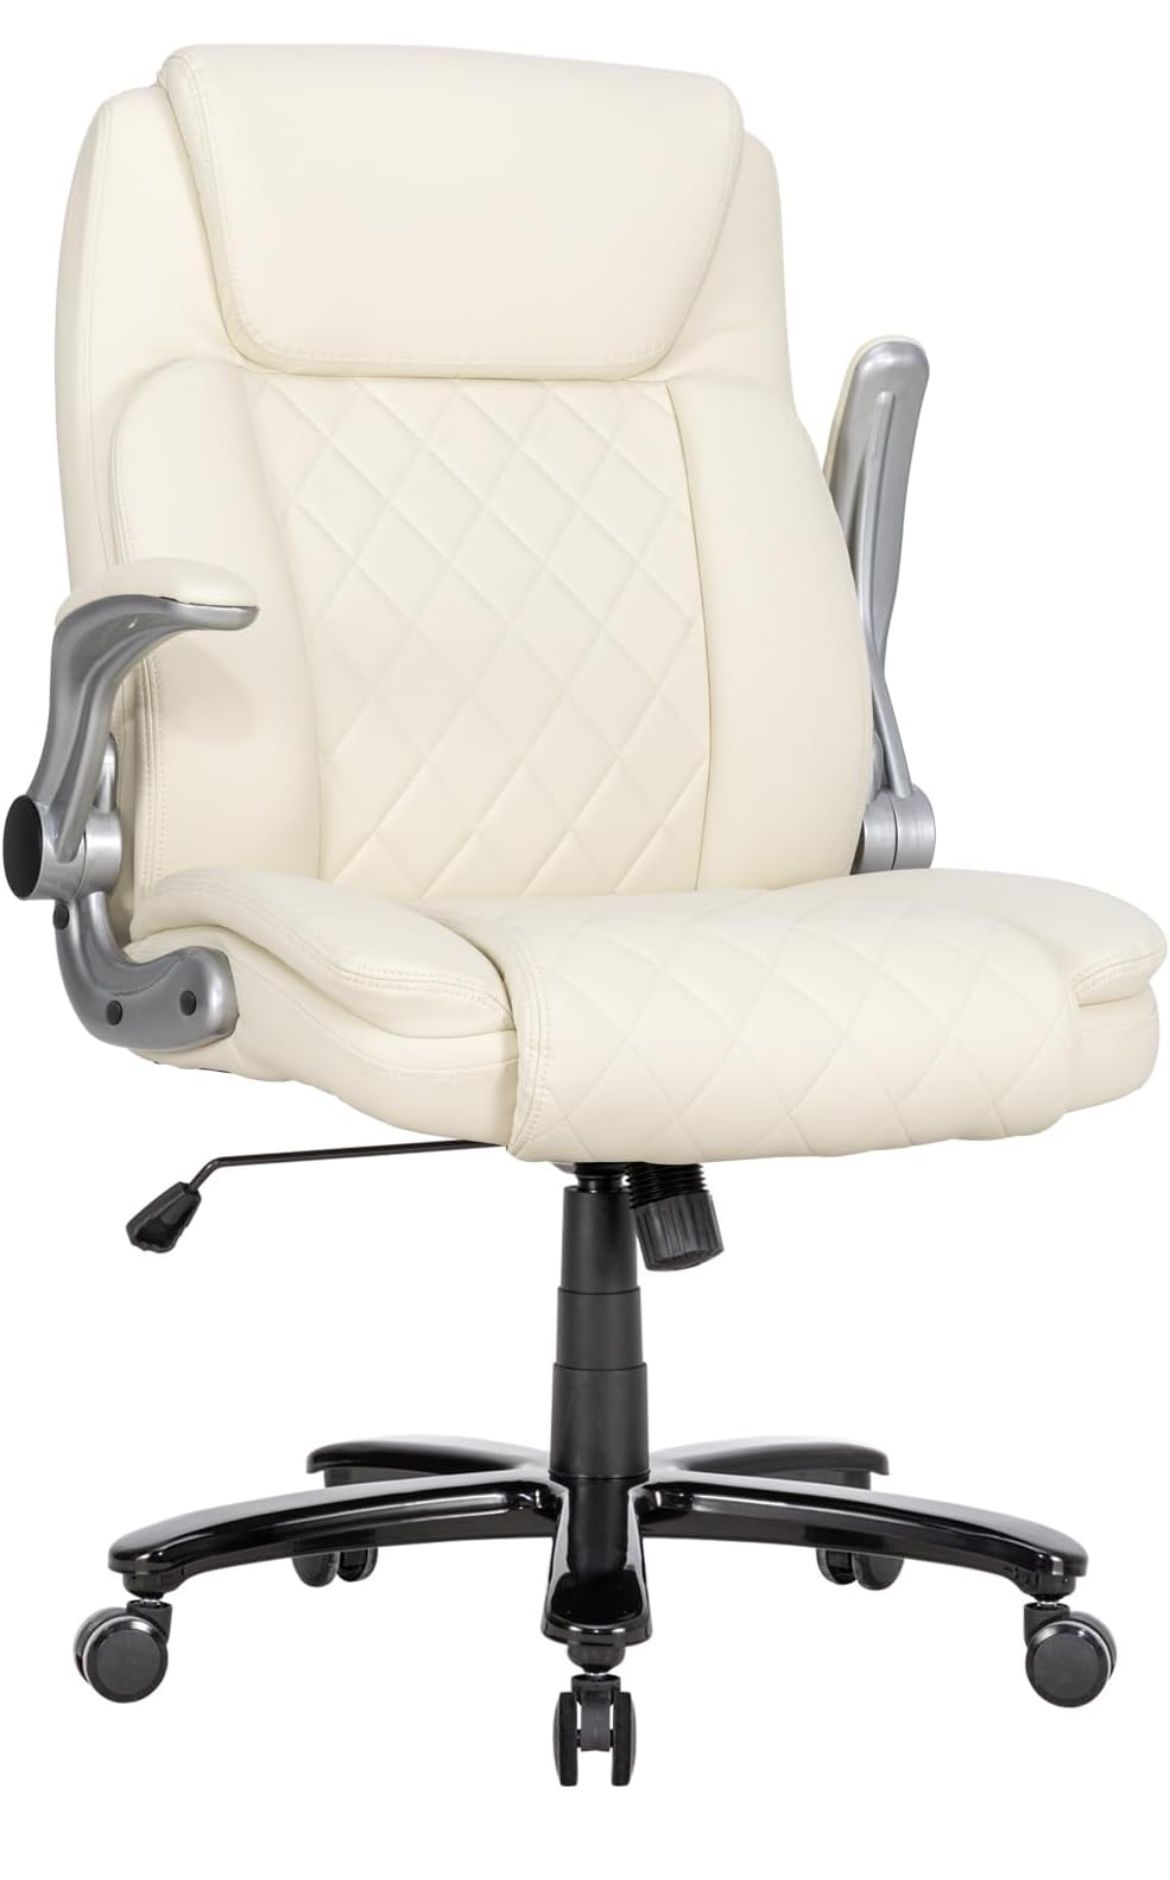 😀 Okeysen Ergonomic Executive Office Chair 400lbs Home Desk Leather Chair with Adjustable Flip-up Armrests, Conference Room Chairs, Wide Seat for Hea